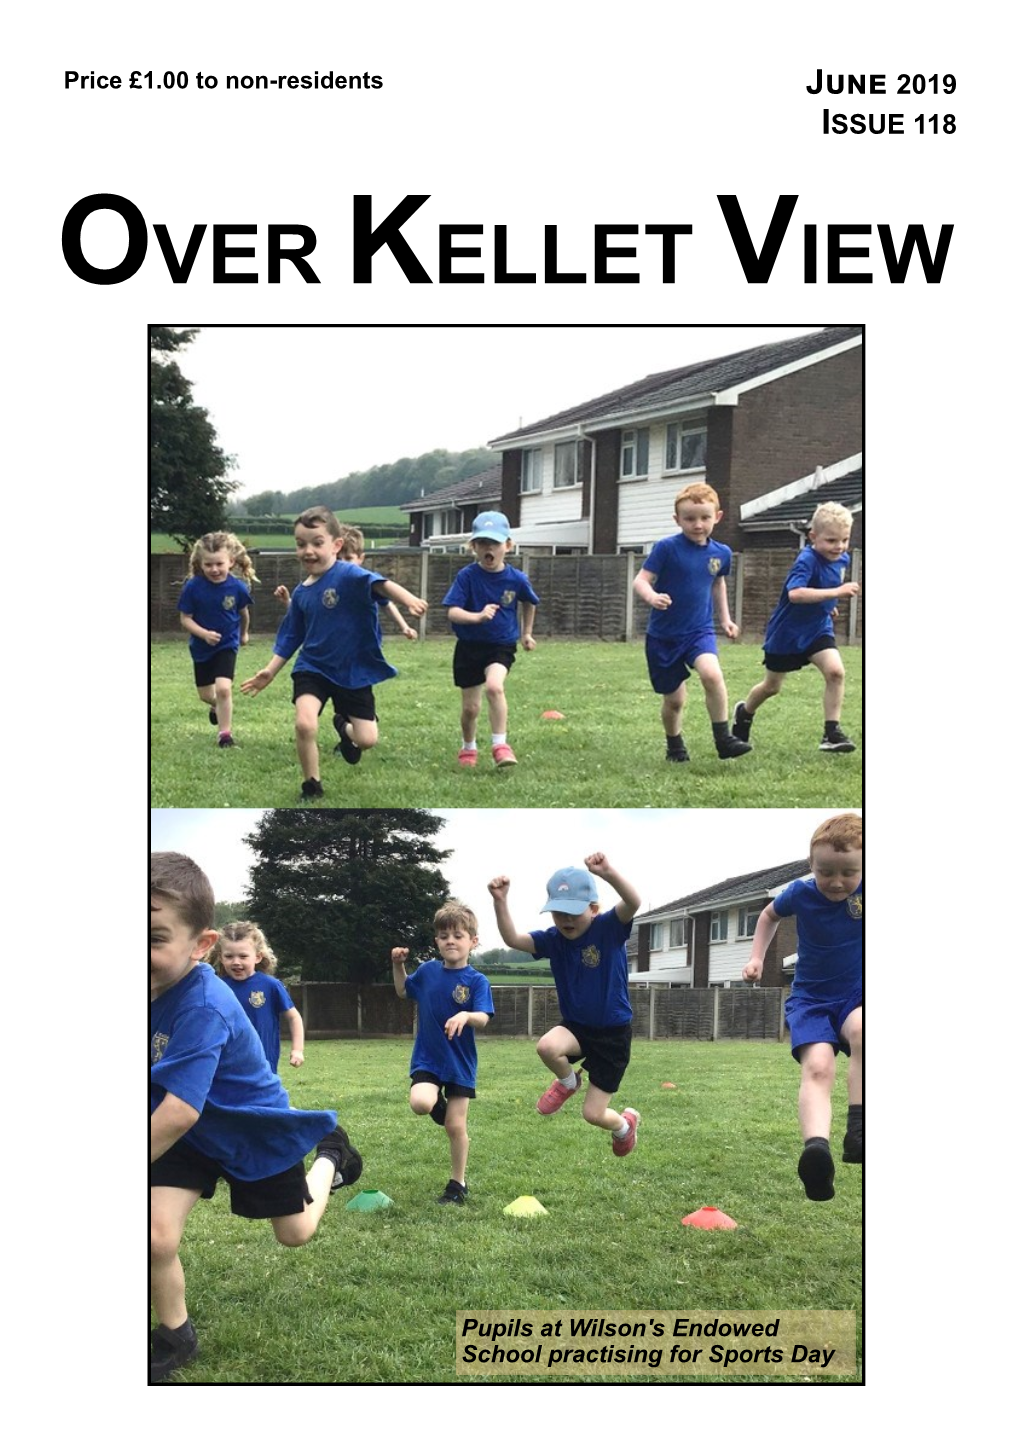 Download the Over Kellet View